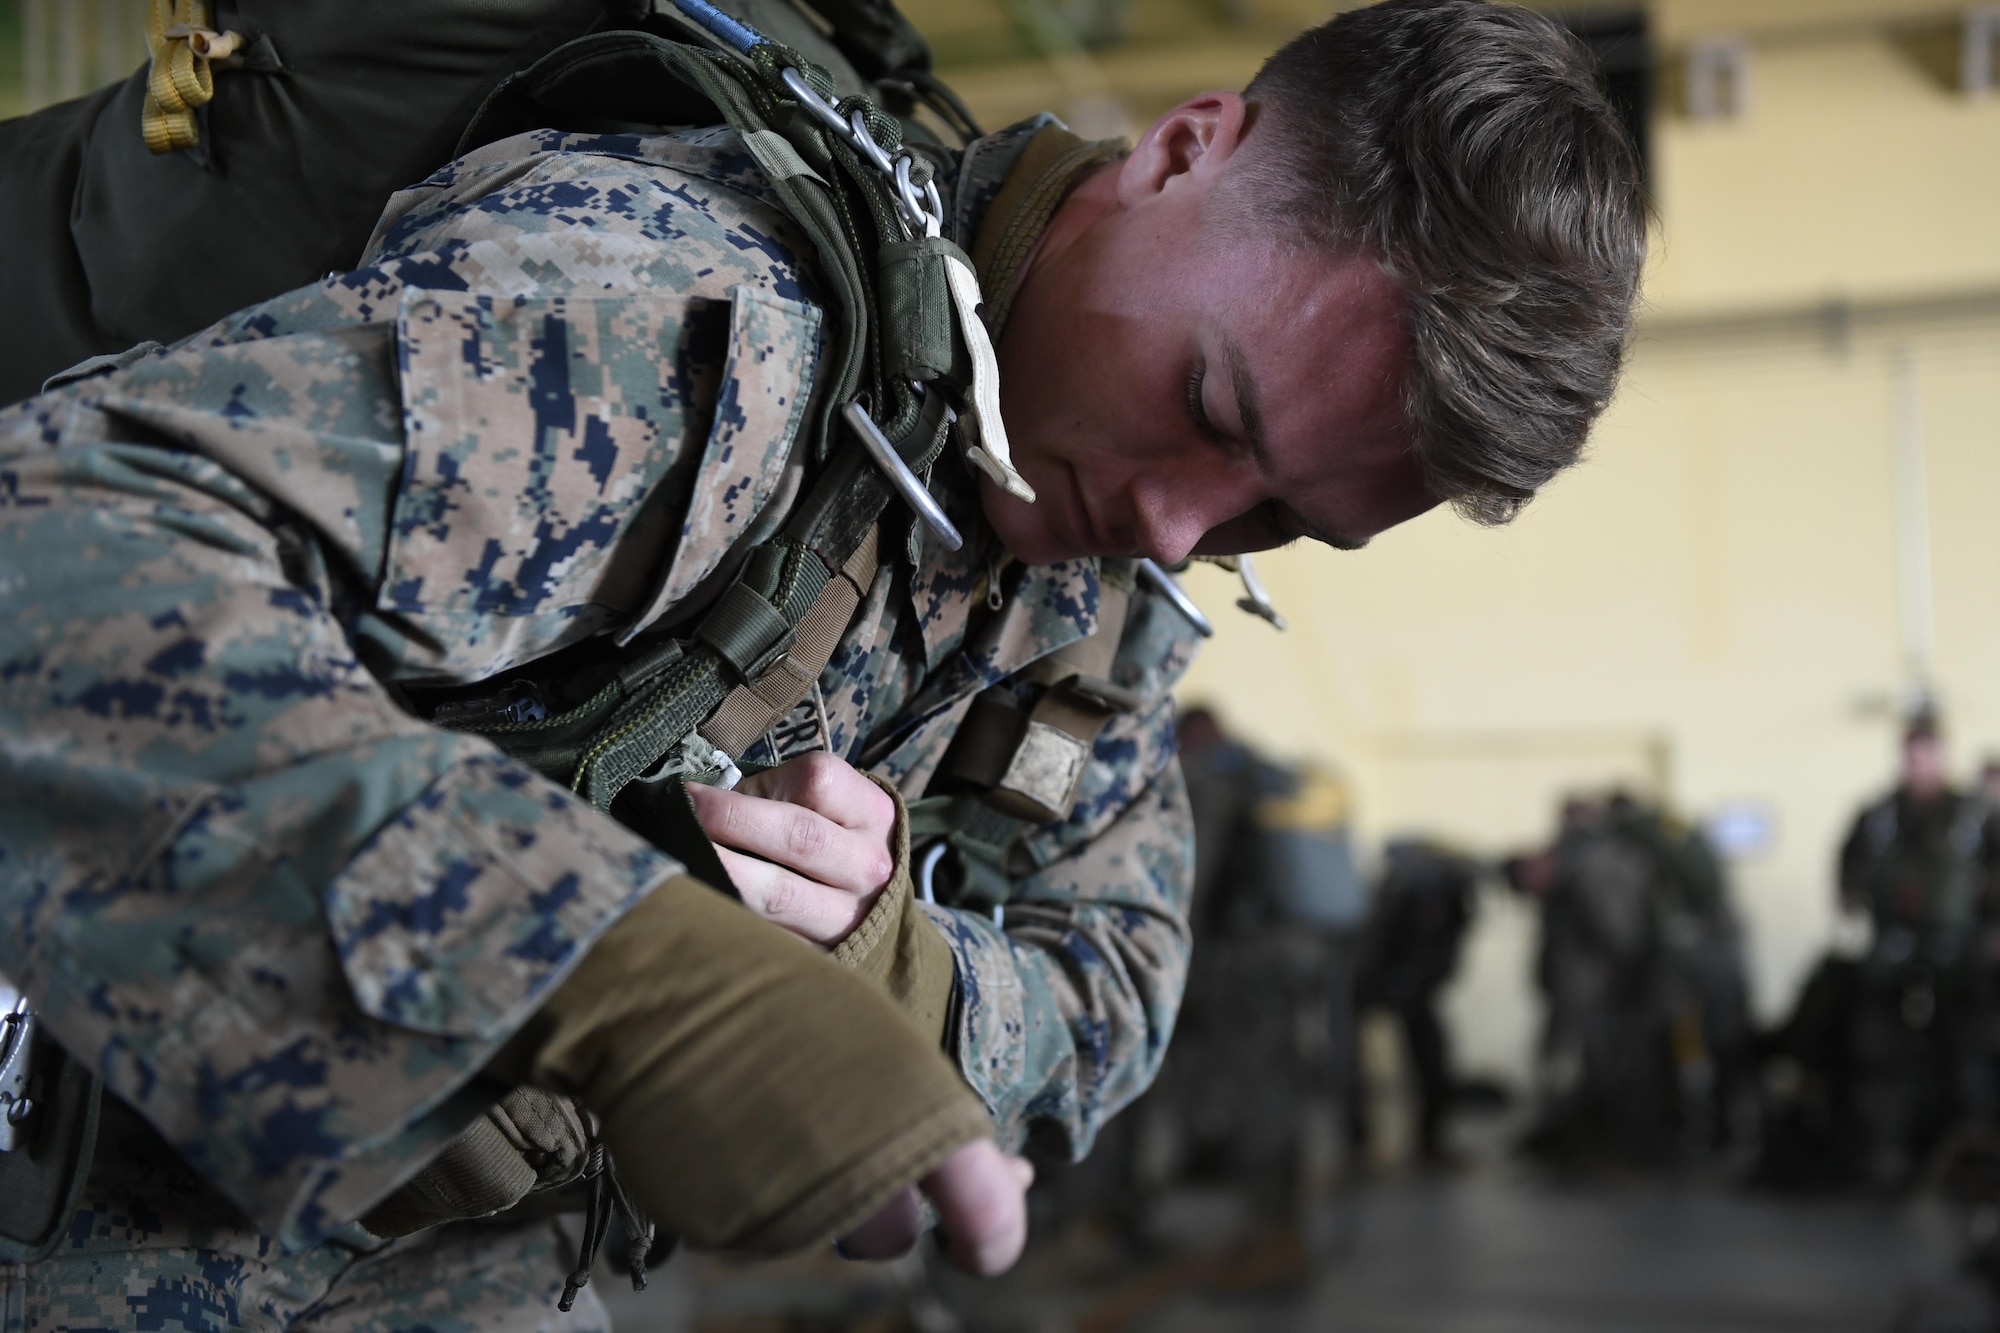 A Marine with the 3rd Reconnaissance Battalion, 3rd Marine Division, III Marine Expeditionary Force, straps a parachute to his body in preparation for a static line parachute drop on Jan. 11, 2017, at Yokota Air Base, Japan. The training ensures that jumpers and flight crew are ready to respond to real world events throughout the Indo-Asia Pacific region. (U.S. Air Force photo by Airman 1st Class Donald Hudson)